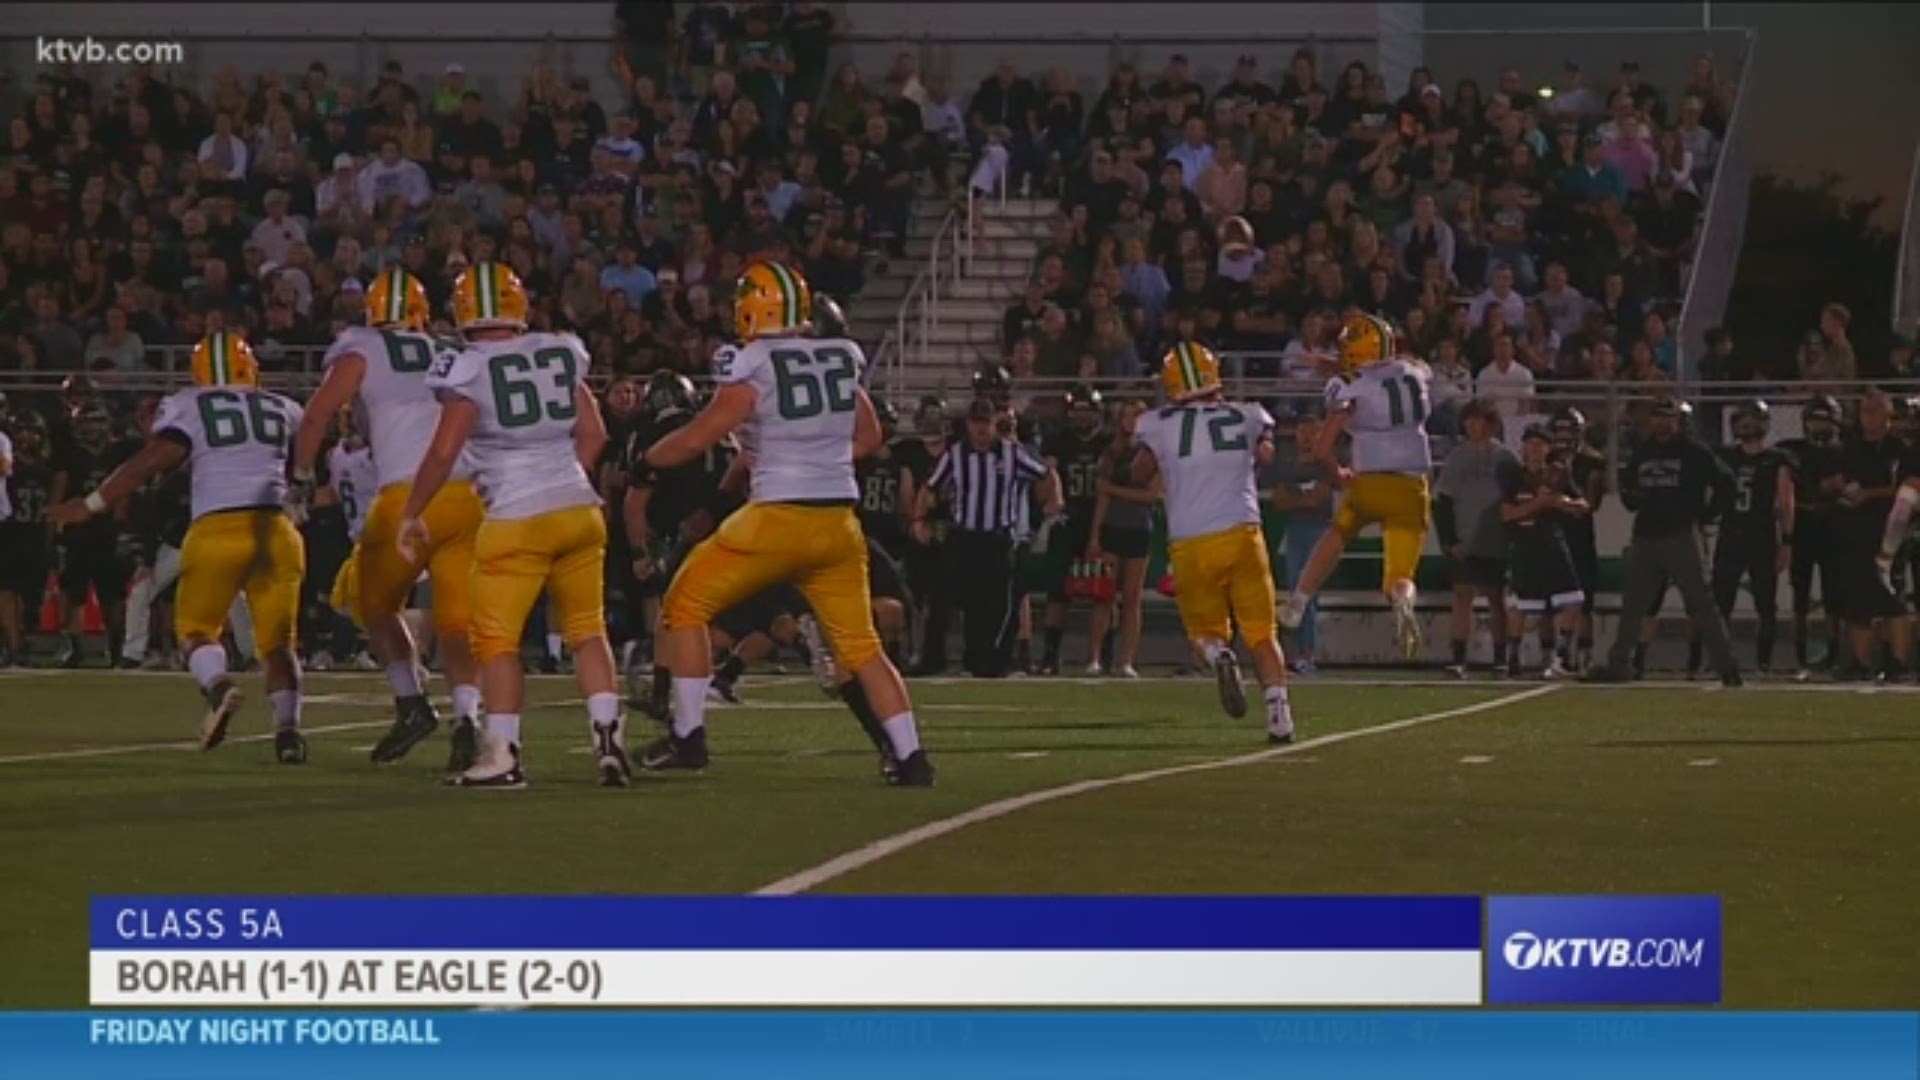 In this Class 5A  week three match up, the Borah Lions played the Eagle Mustangs with Utah State offensive coordinator Mike Sanford in attendance. The Mustangs would go onto win 29-13.